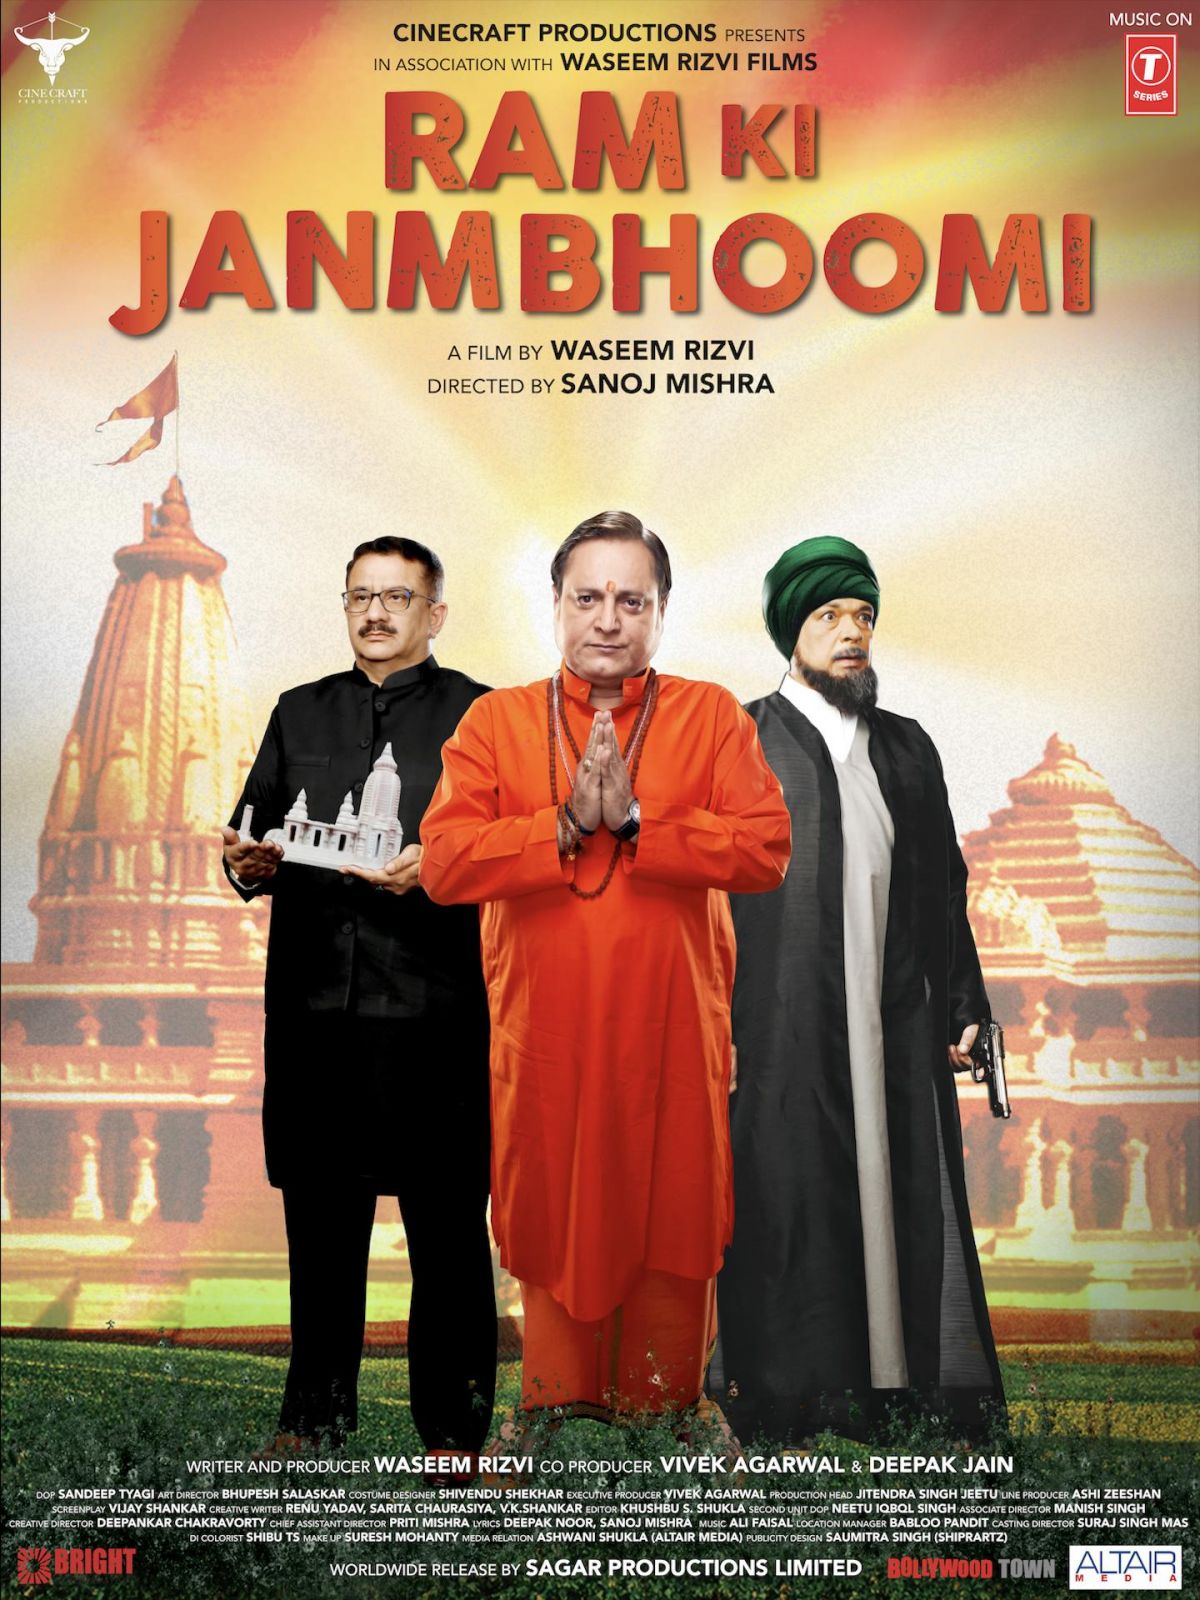 The film based on Ram Mandir and Babri Masjid gets released, watch the movie here